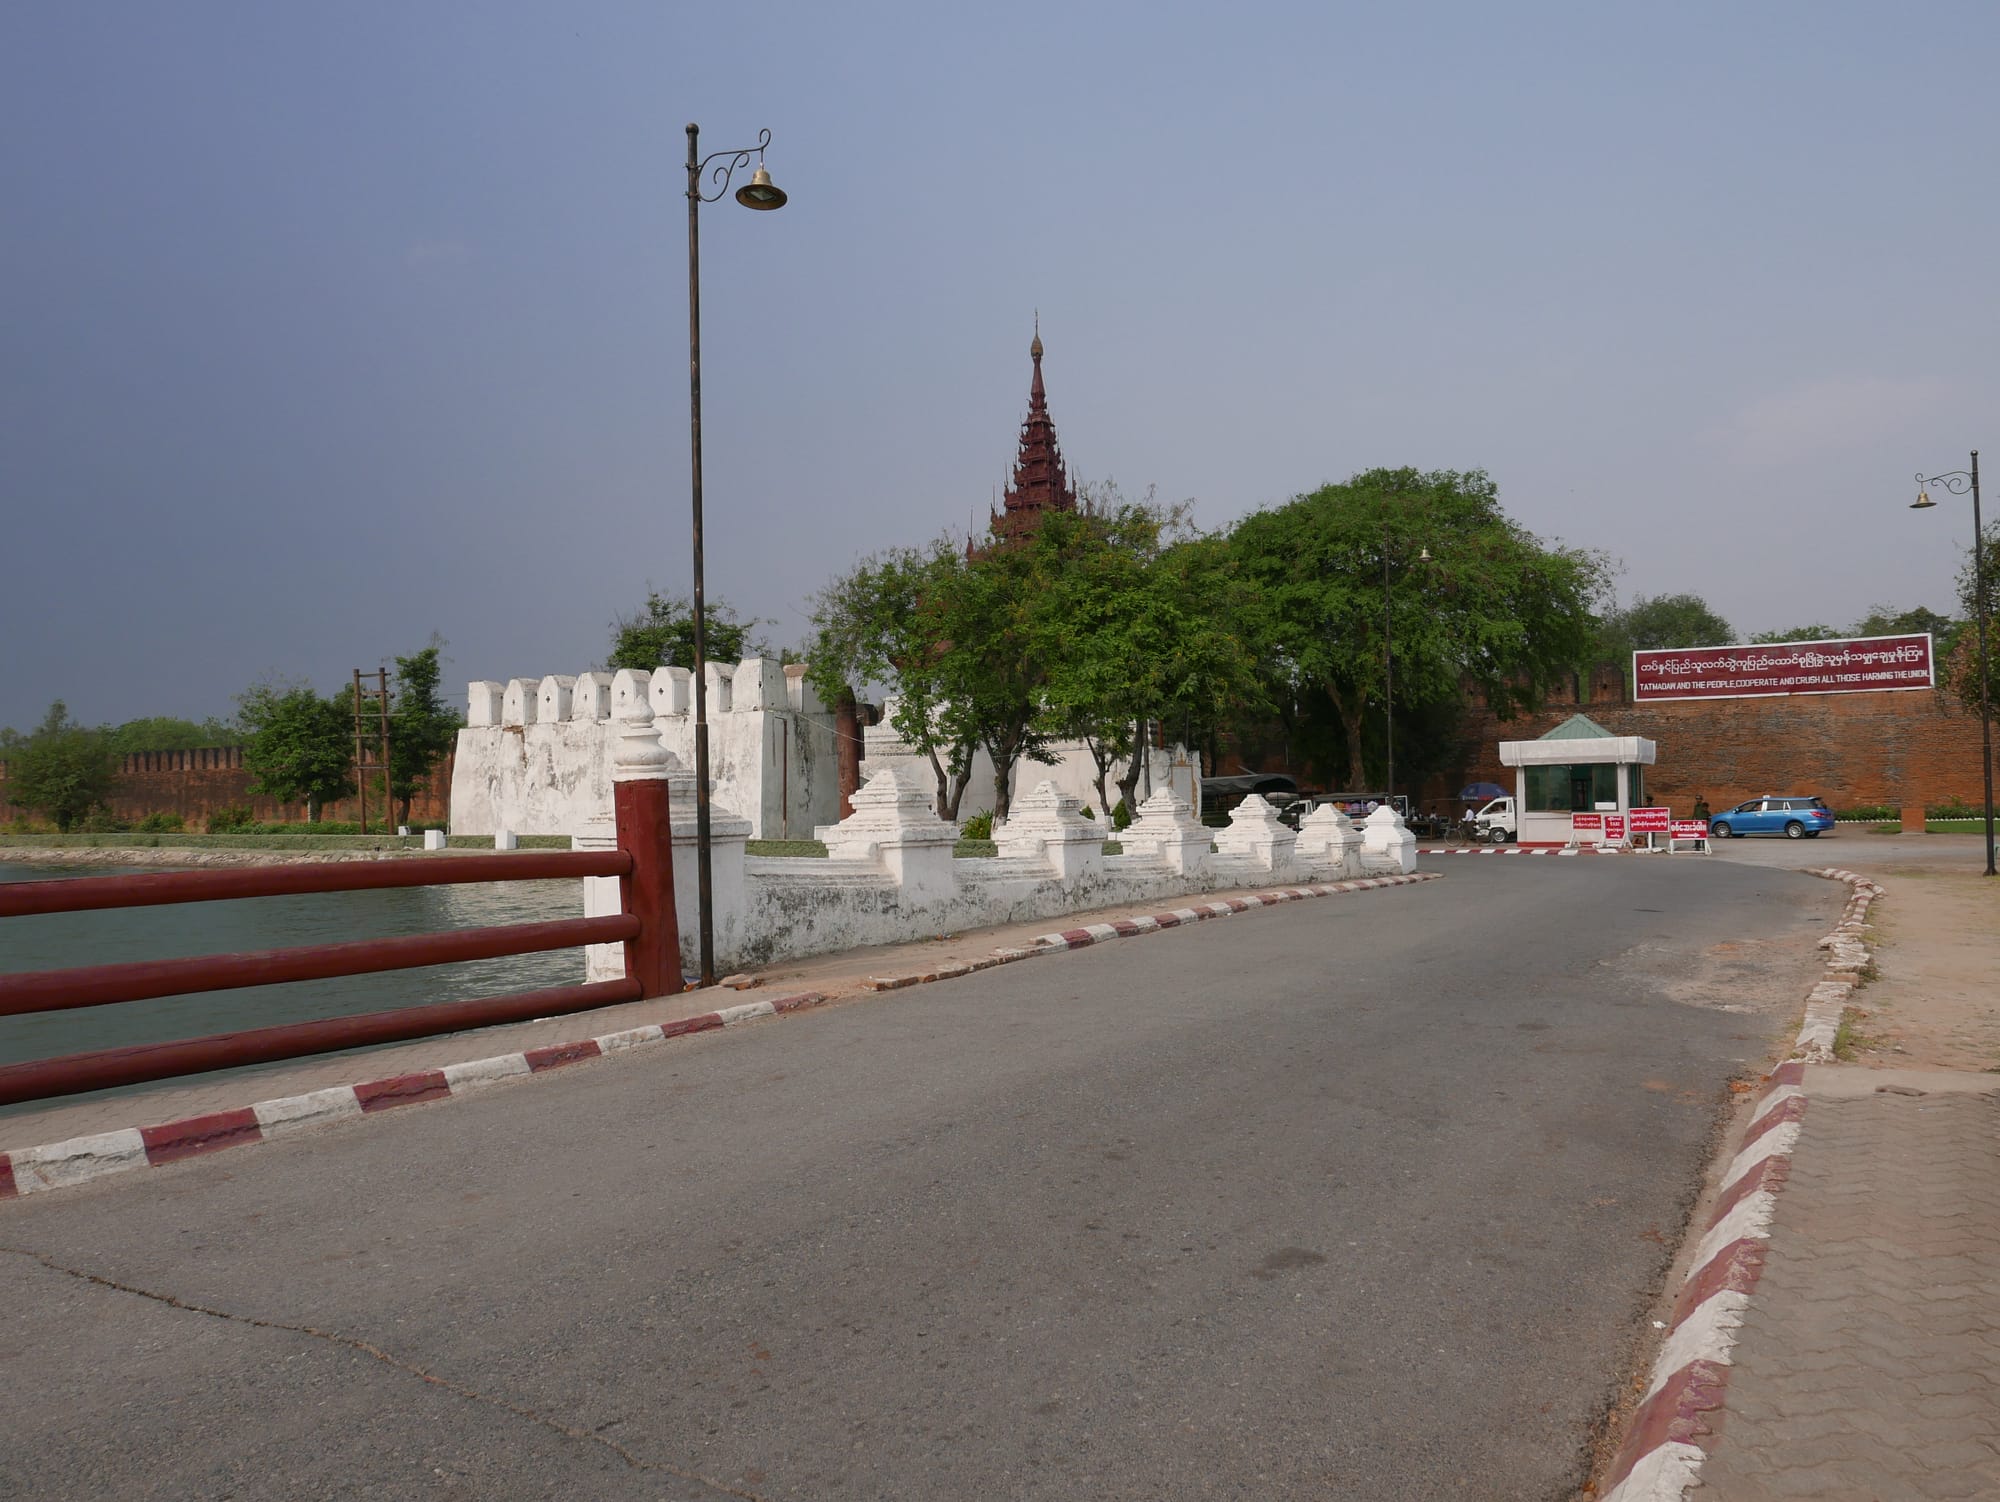 Photo by Author — the east entrance to Mandalay Grand Royal Palace